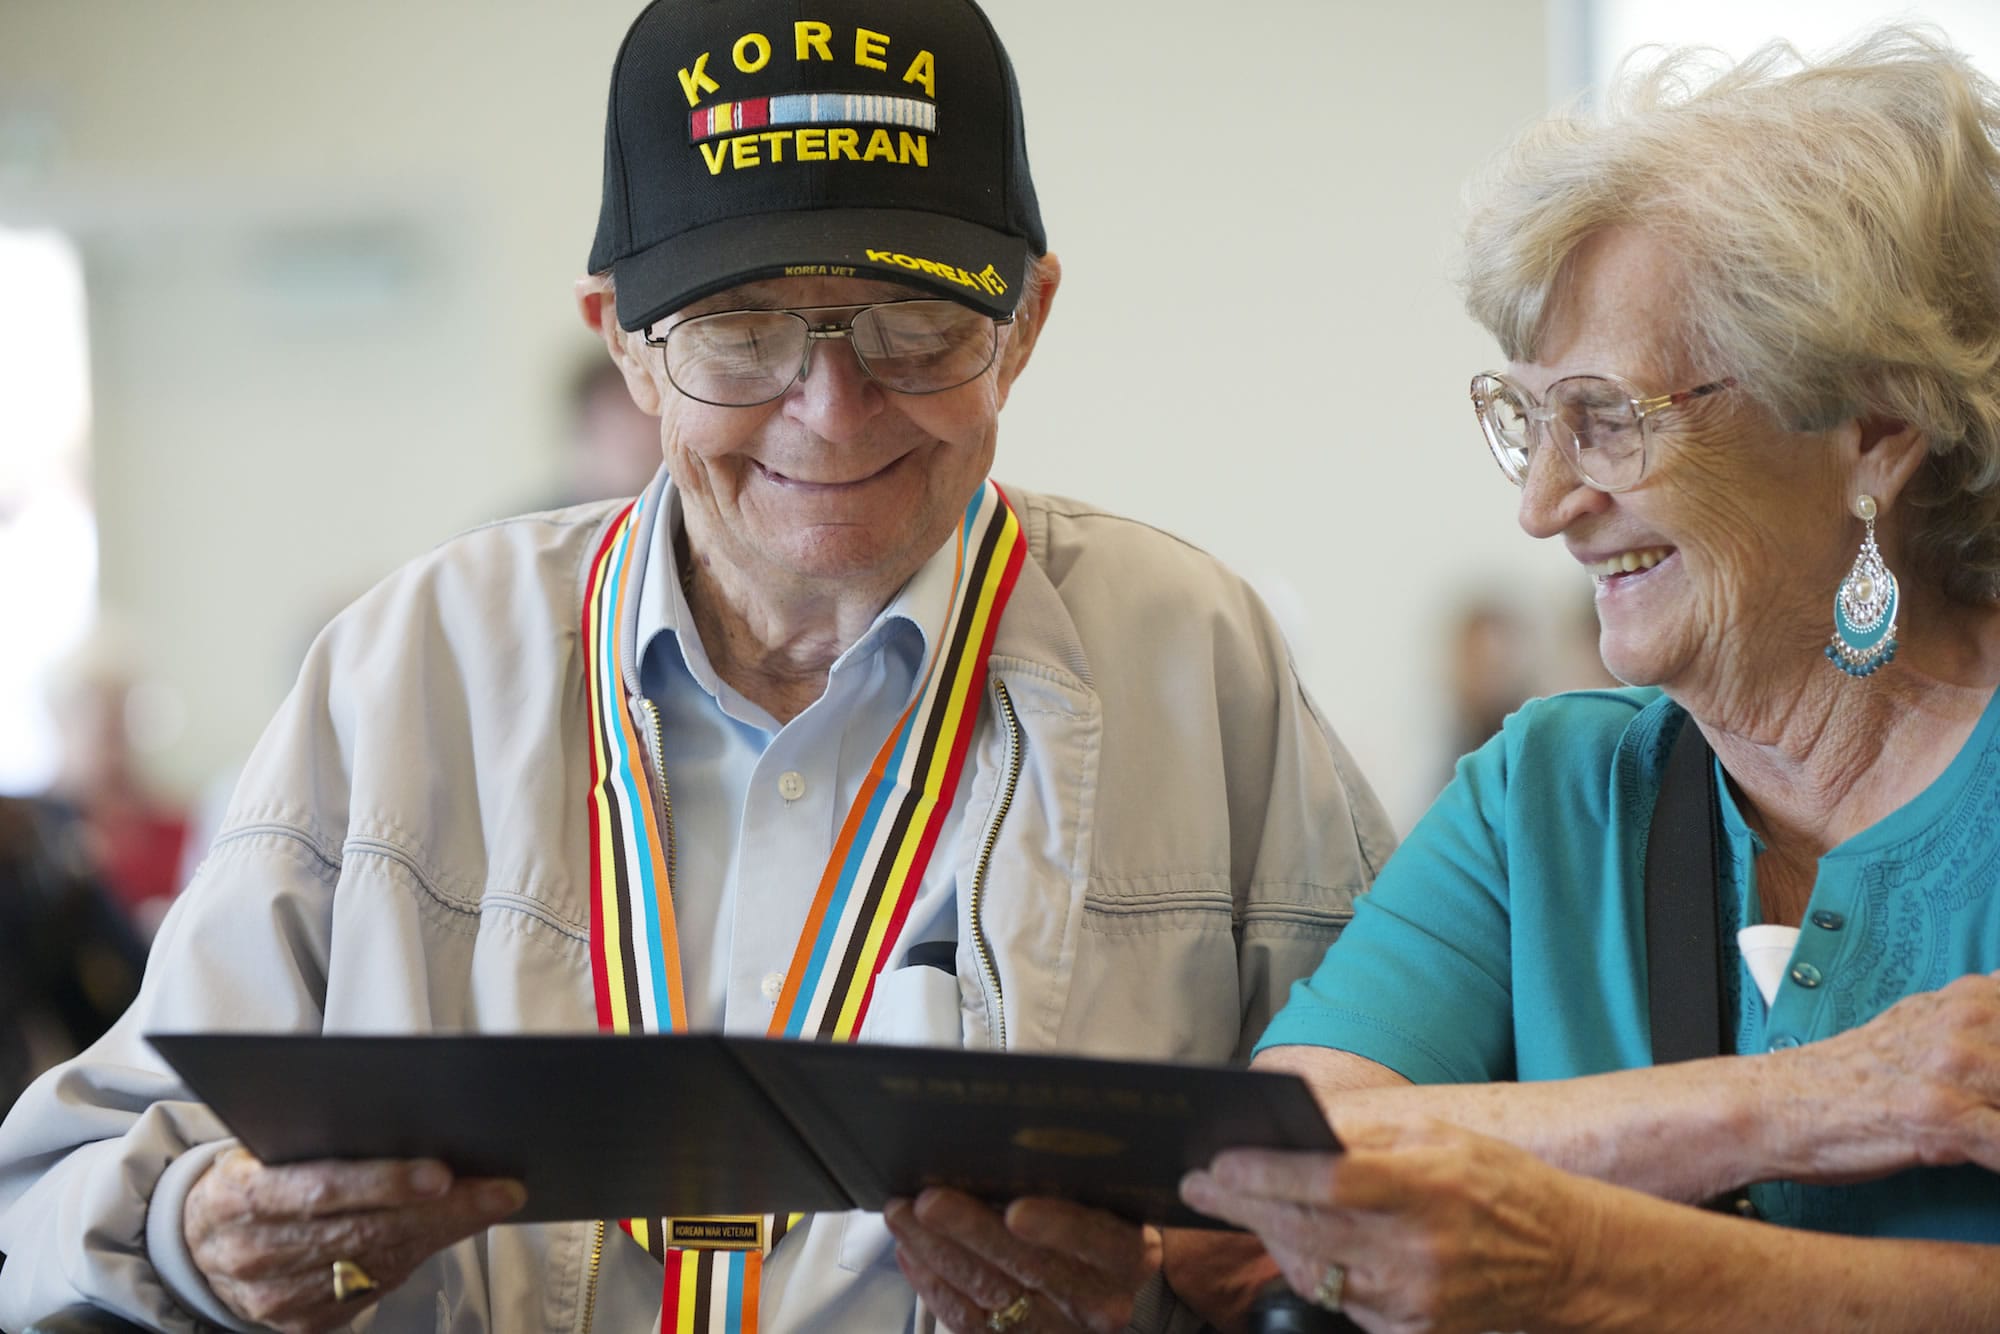 Korean War veteran Jimmie Olsen and wife of 64 years Jean Olsen, read a certificate from the South Korean government after receiving a medal at the Korean Liberation Day and Korean-U.S.